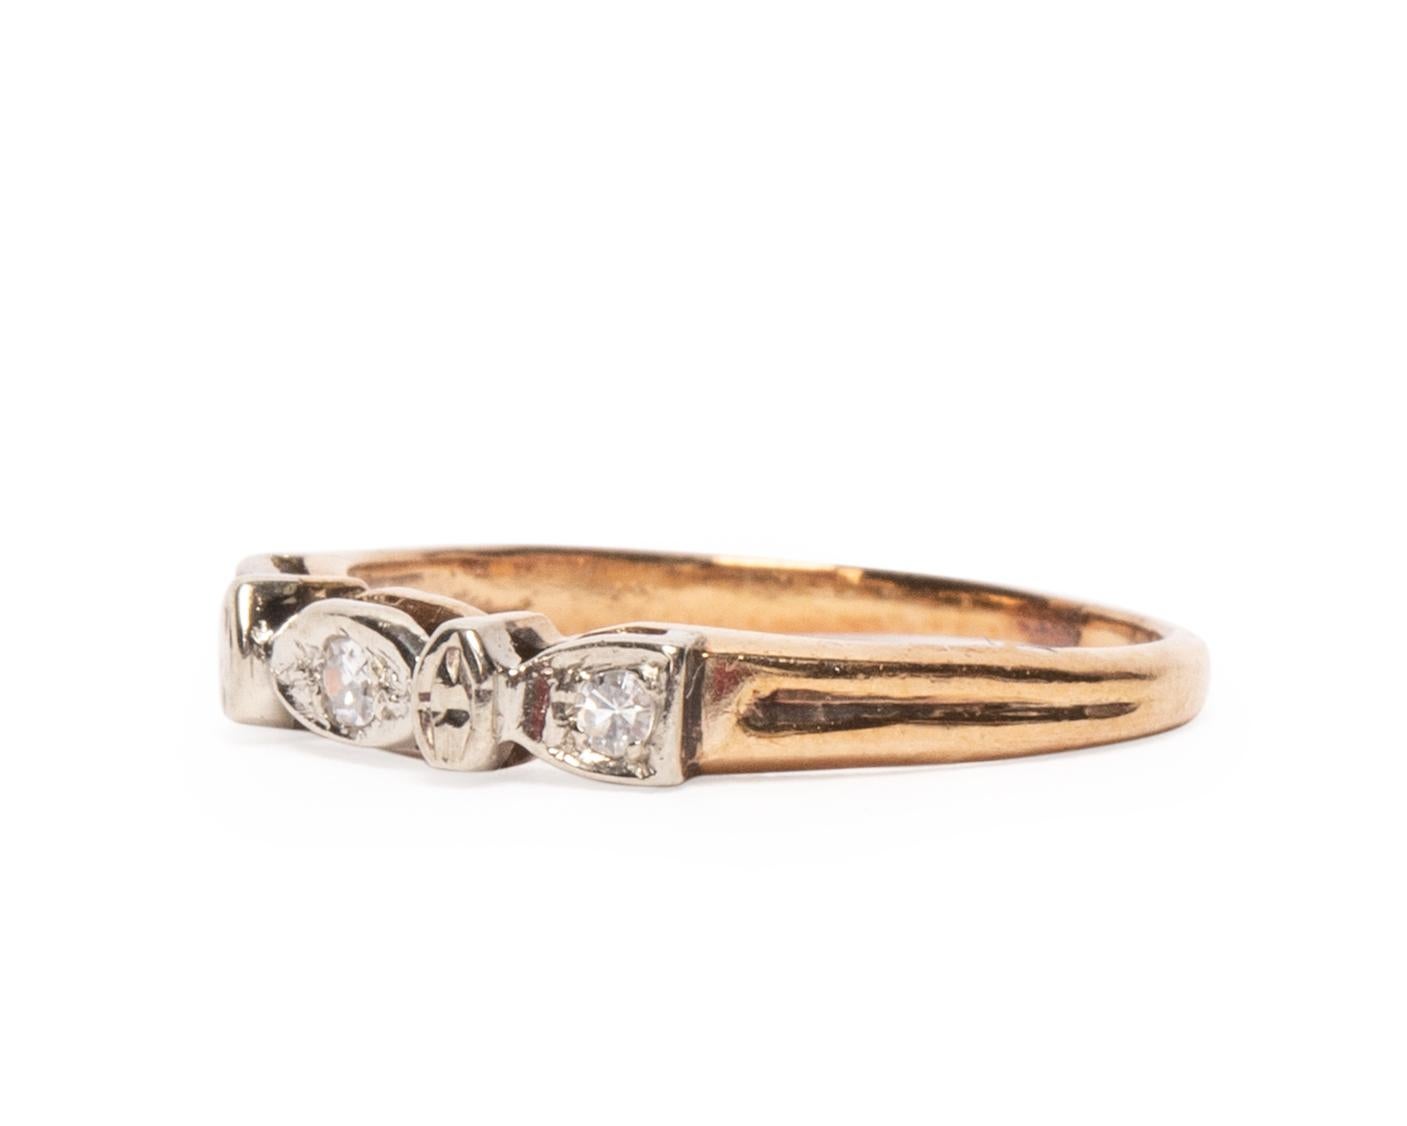 Here we have a beautiful 1930's Art Deco piece in a unique geometric design,  the diamonds are set in the 14K white gold pattern along the top of the band, leaving the rest of the ring yellow gold giving the two tone effect. With a dainty design on